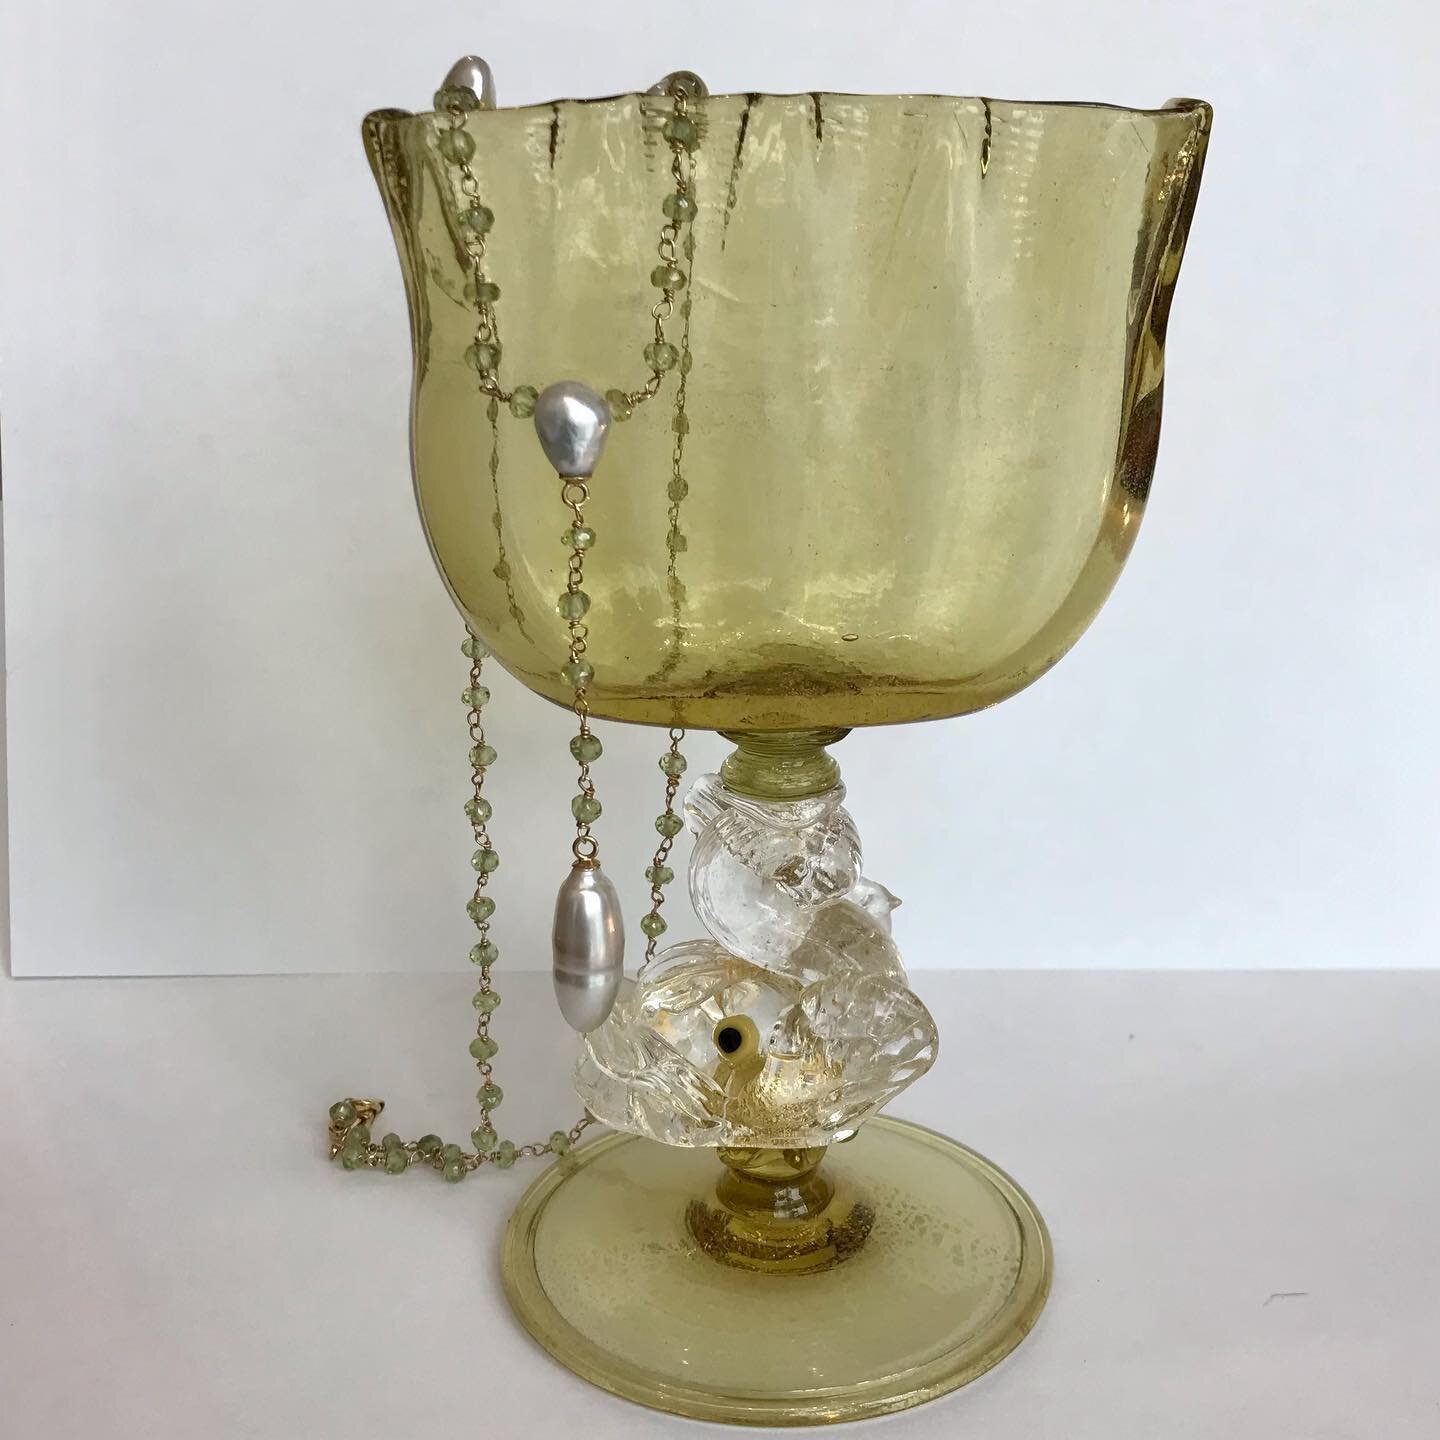 Freshwater pearls, peridot and 14k gold. Loving this combination for spring. Bonus points for anyone who knows what the glass vessel was intended to hold!!